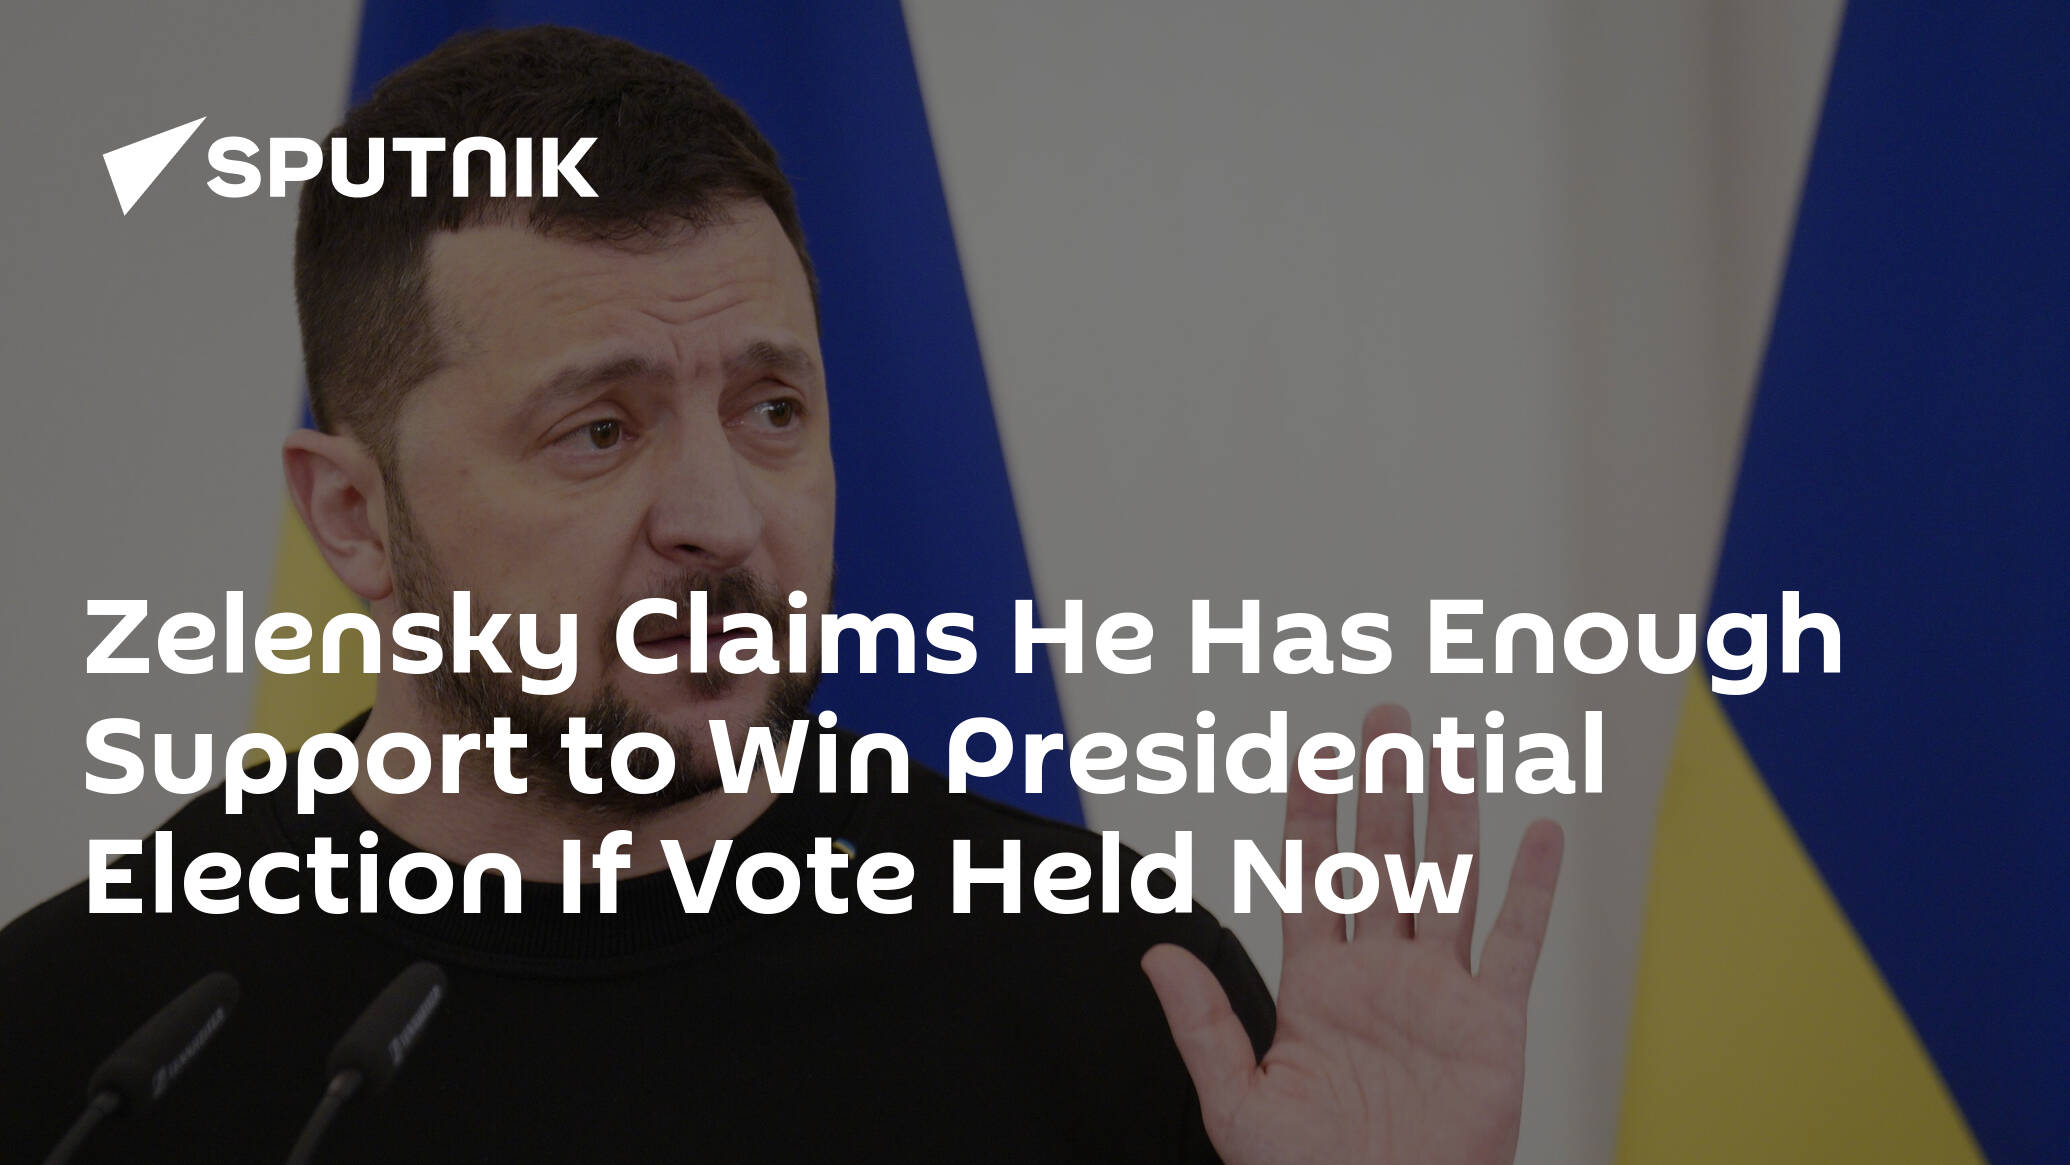 Zelensky Claims He Has Enough Support to Win Presidential Election If Vote Held Now